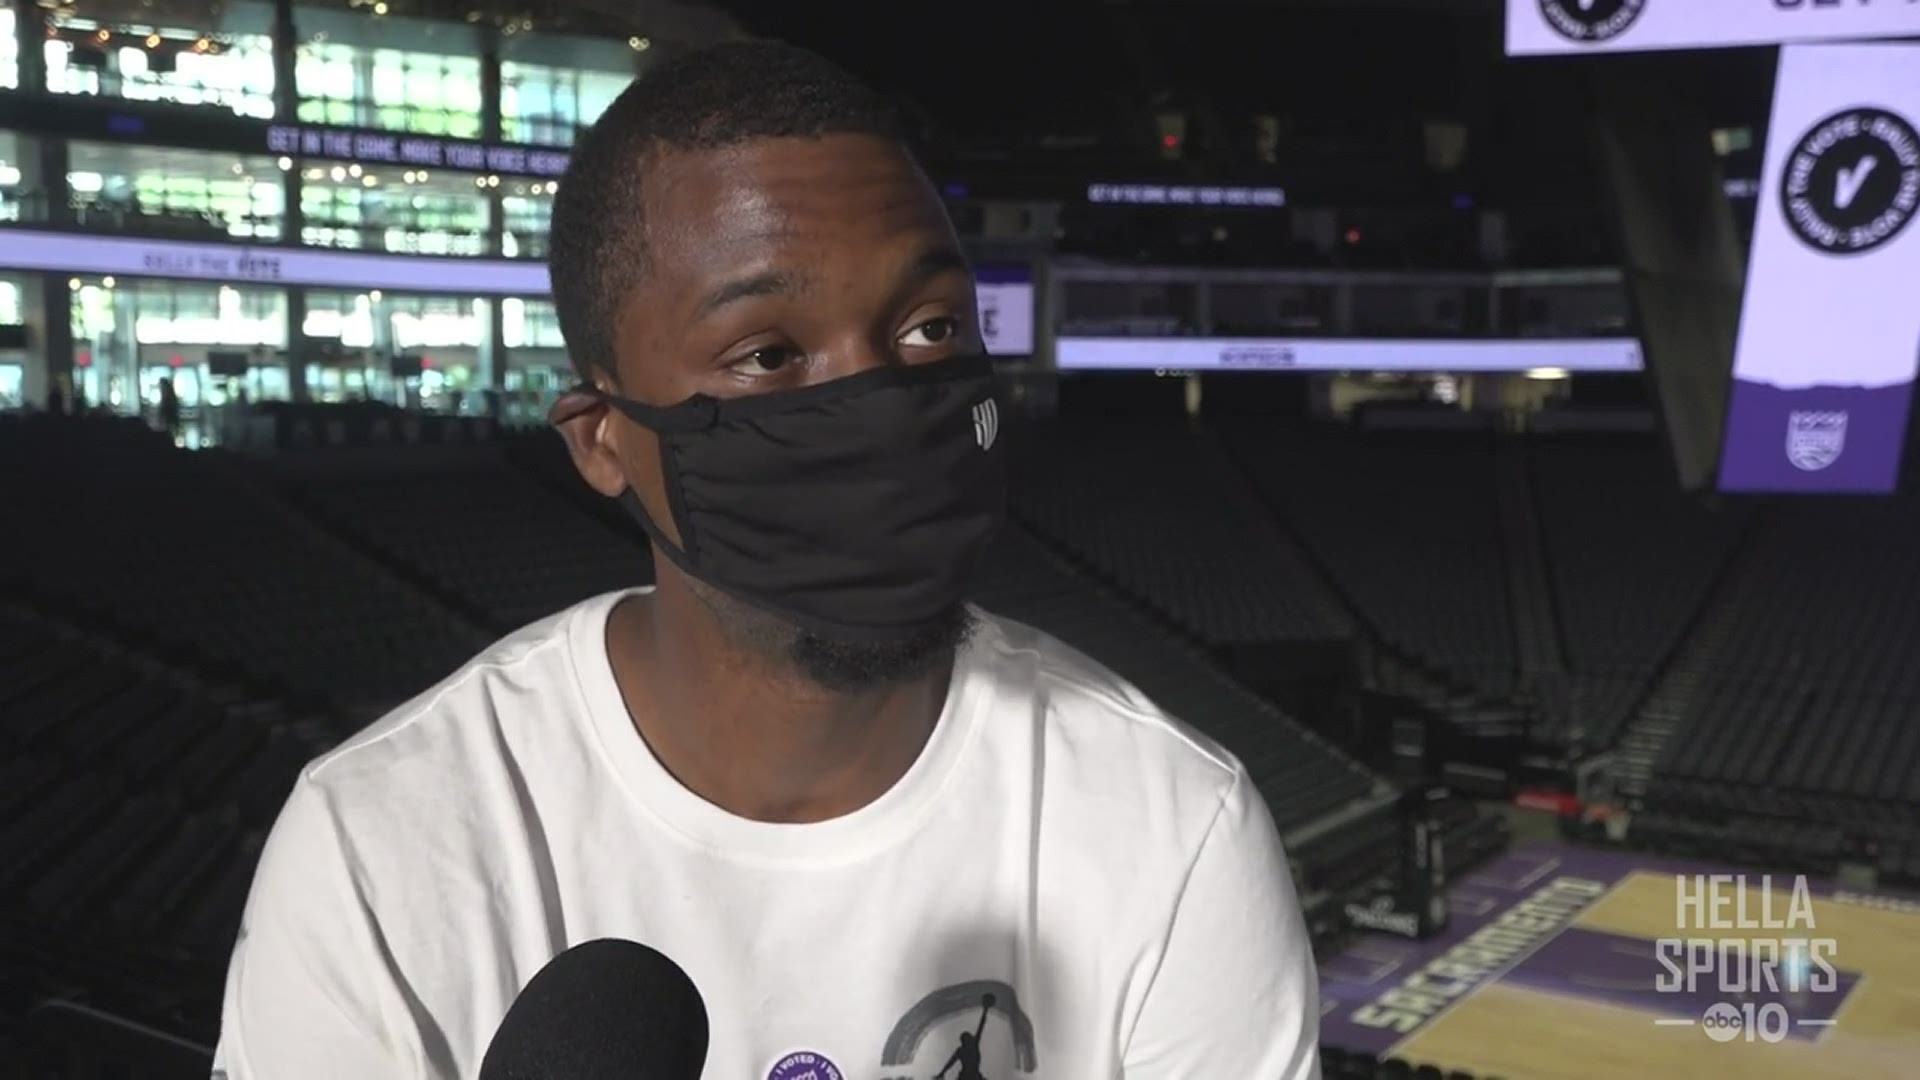 Kings F Harrison Barnes speaks to ABC10 about his voting early at Sacramento's Golden 1 Center and being one of the NBA's loudest voices on social issues.